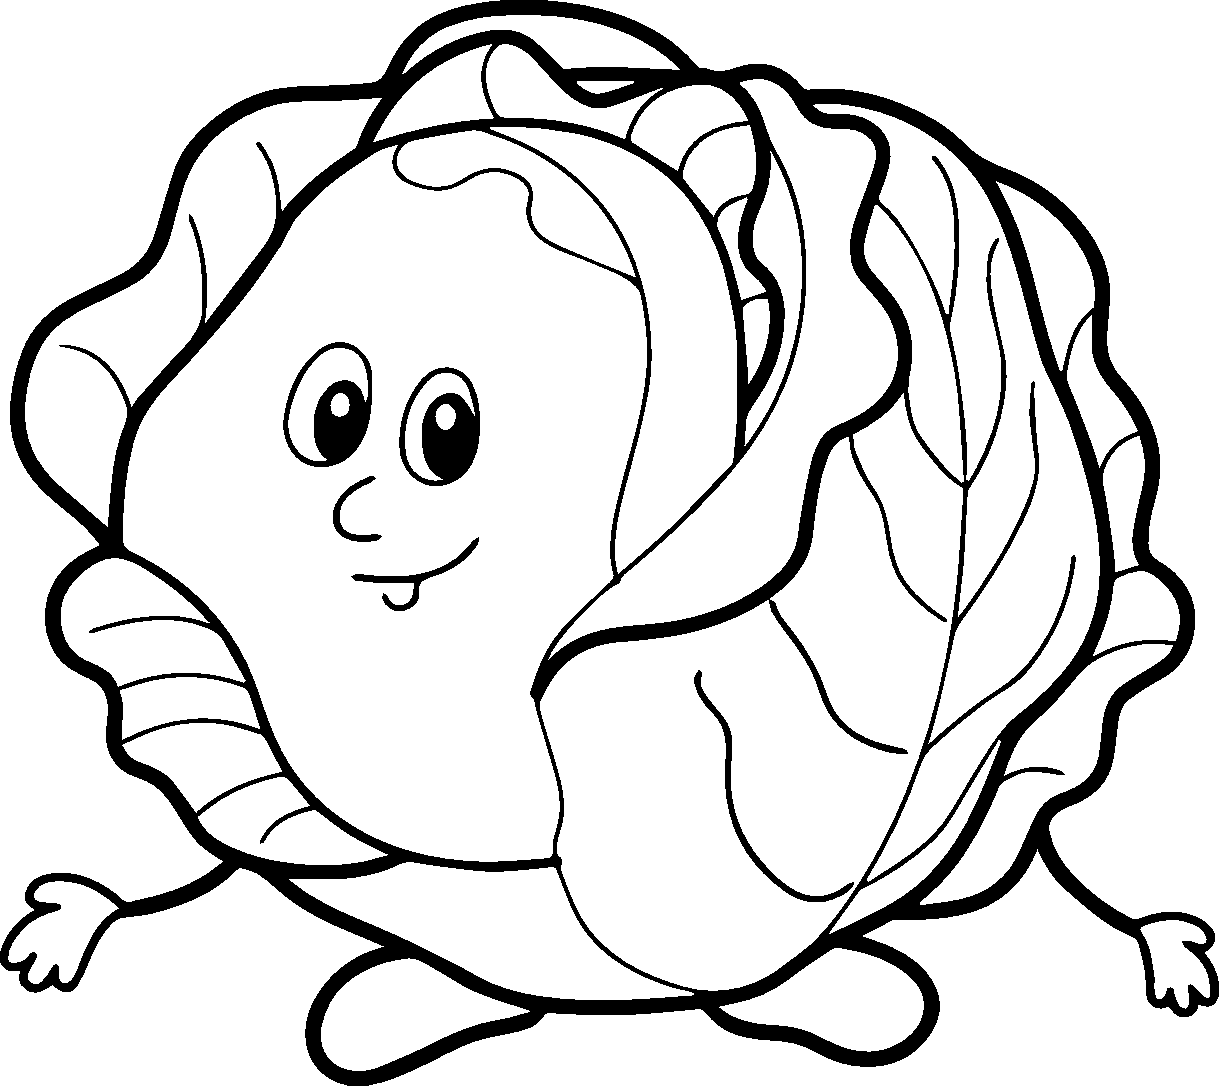 cabbage black and white clipart